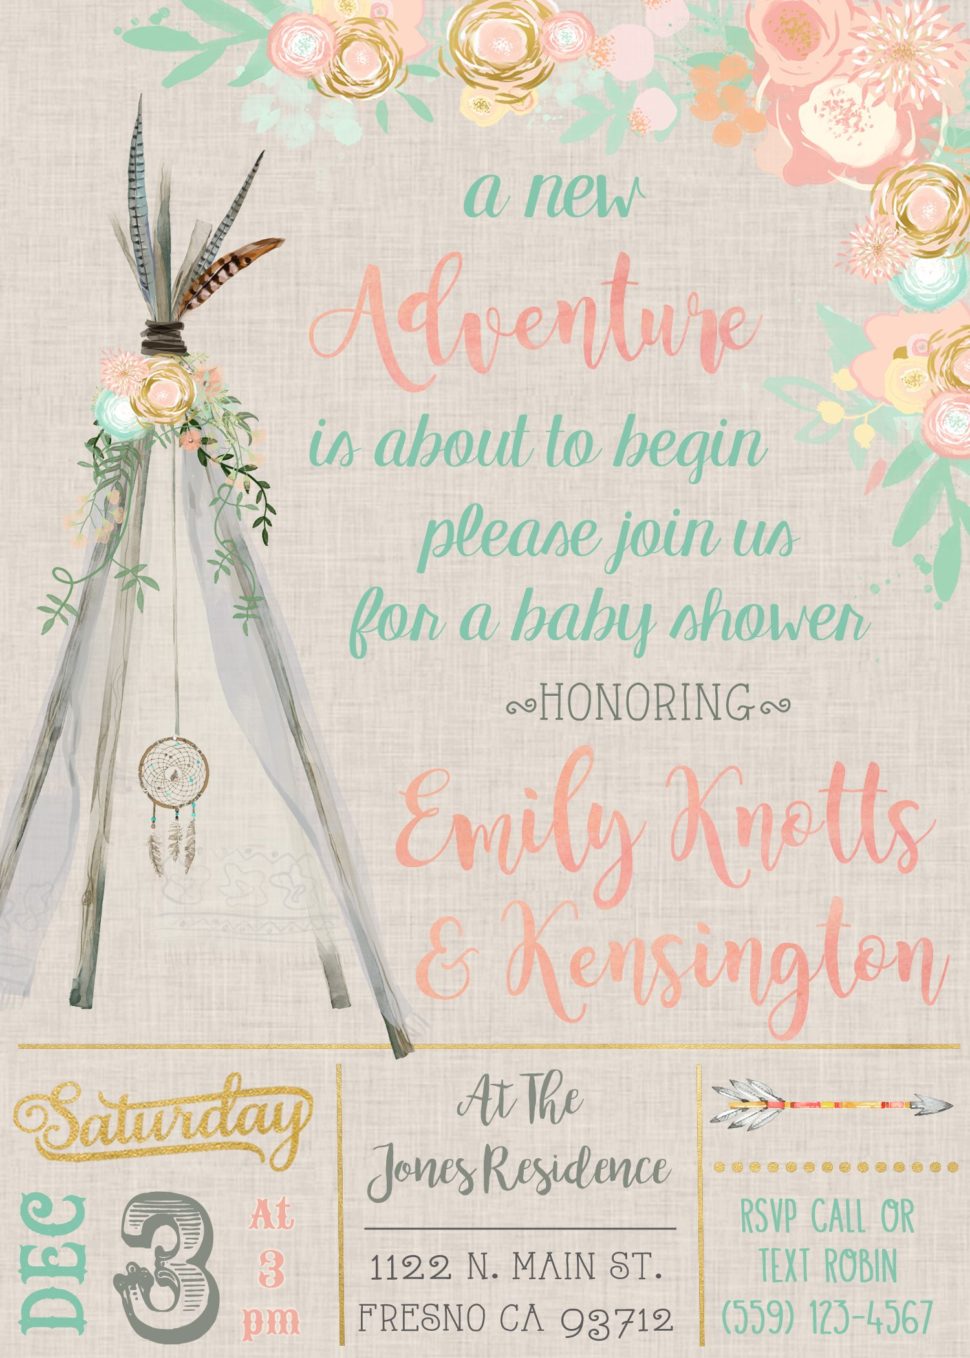 Medium Size of Baby Shower:nautical Baby Shower Invitations For Boys Baby Girl Themes For Bedroom Baby Shower Ideas Baby Shower Decorations Themes For Baby Girl Nursery Baby Girl Themes For Bedroom Baby Shower Centerpiece Ideas For Boys Invitations Oriental Trading Baby Shower